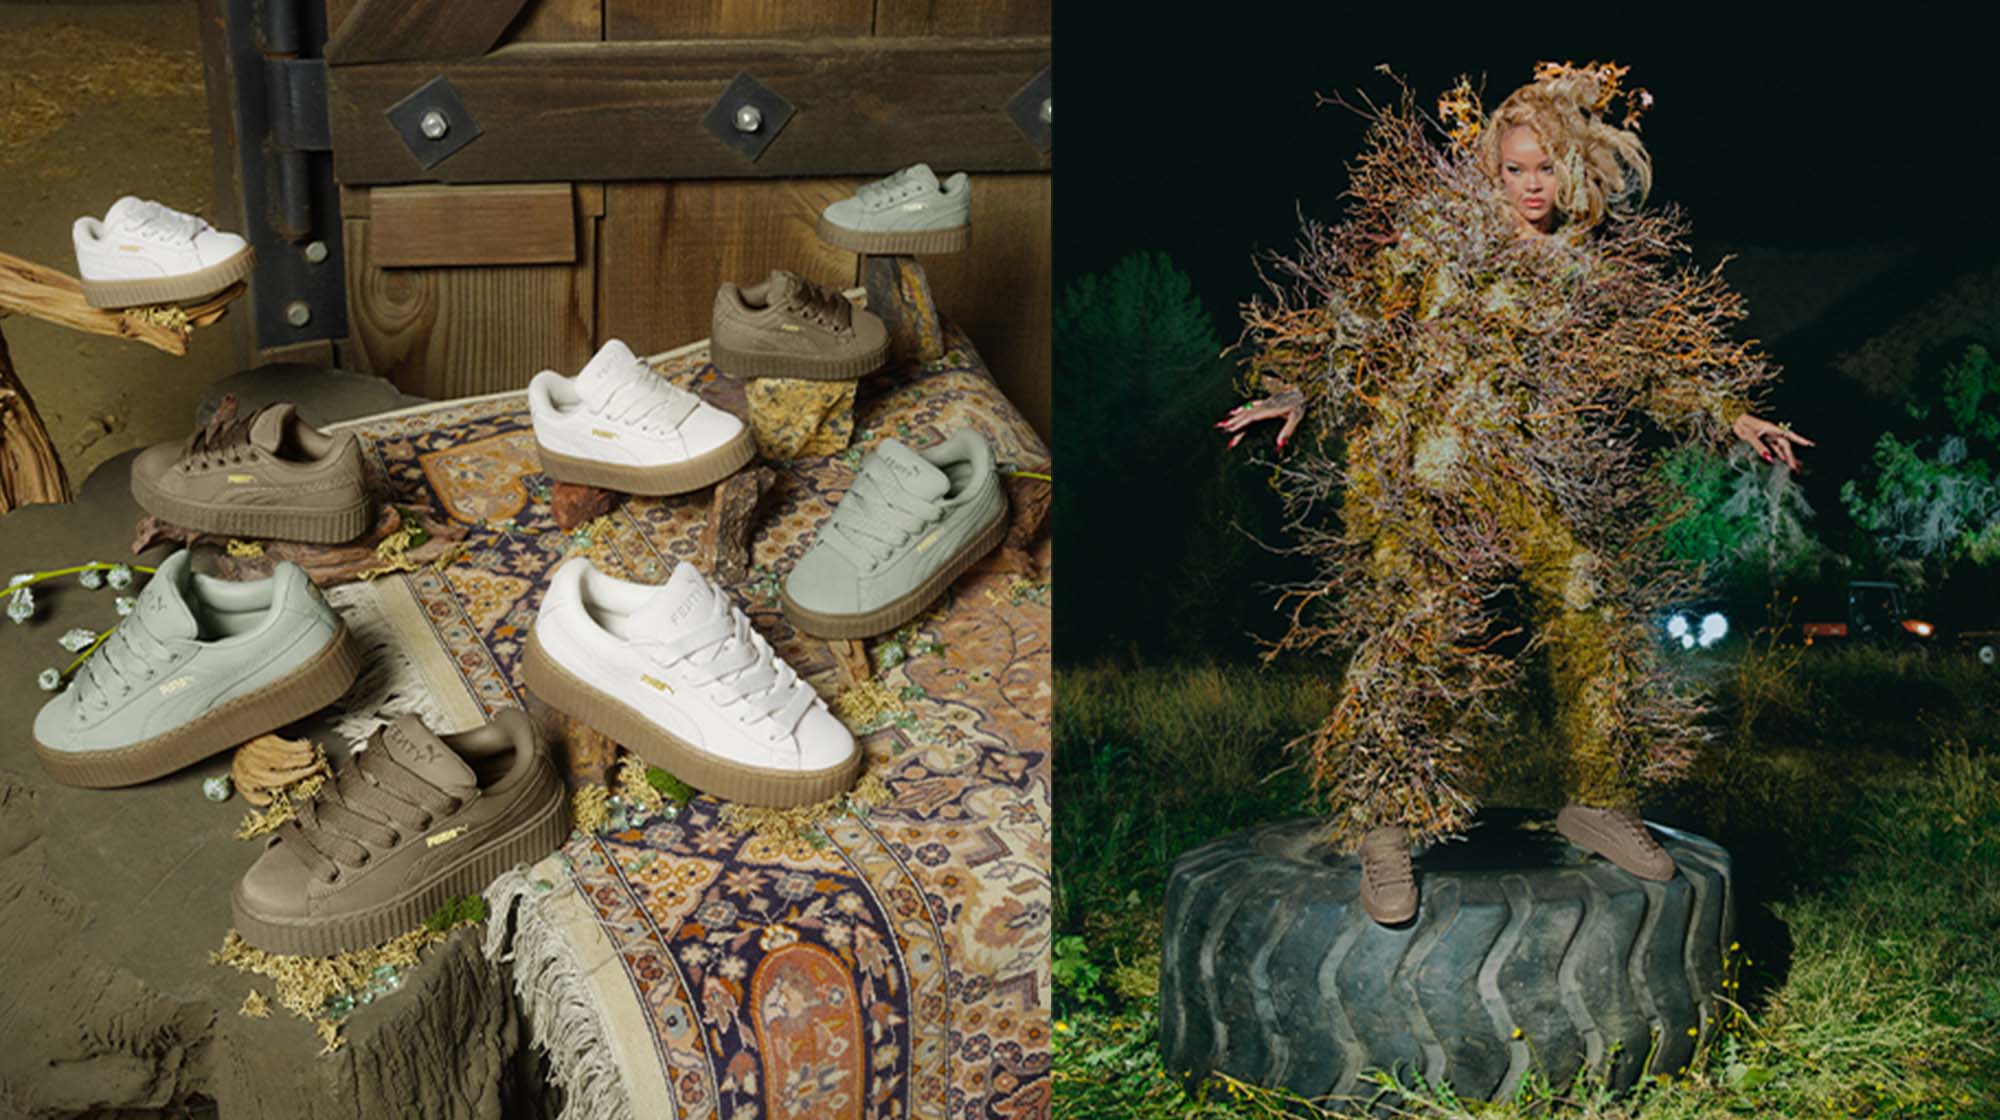 assortment of blue, green, and white sneakers in various sizes on top of a rug; Rihanna dressed in moss standing on top of a tire in brown sneakers